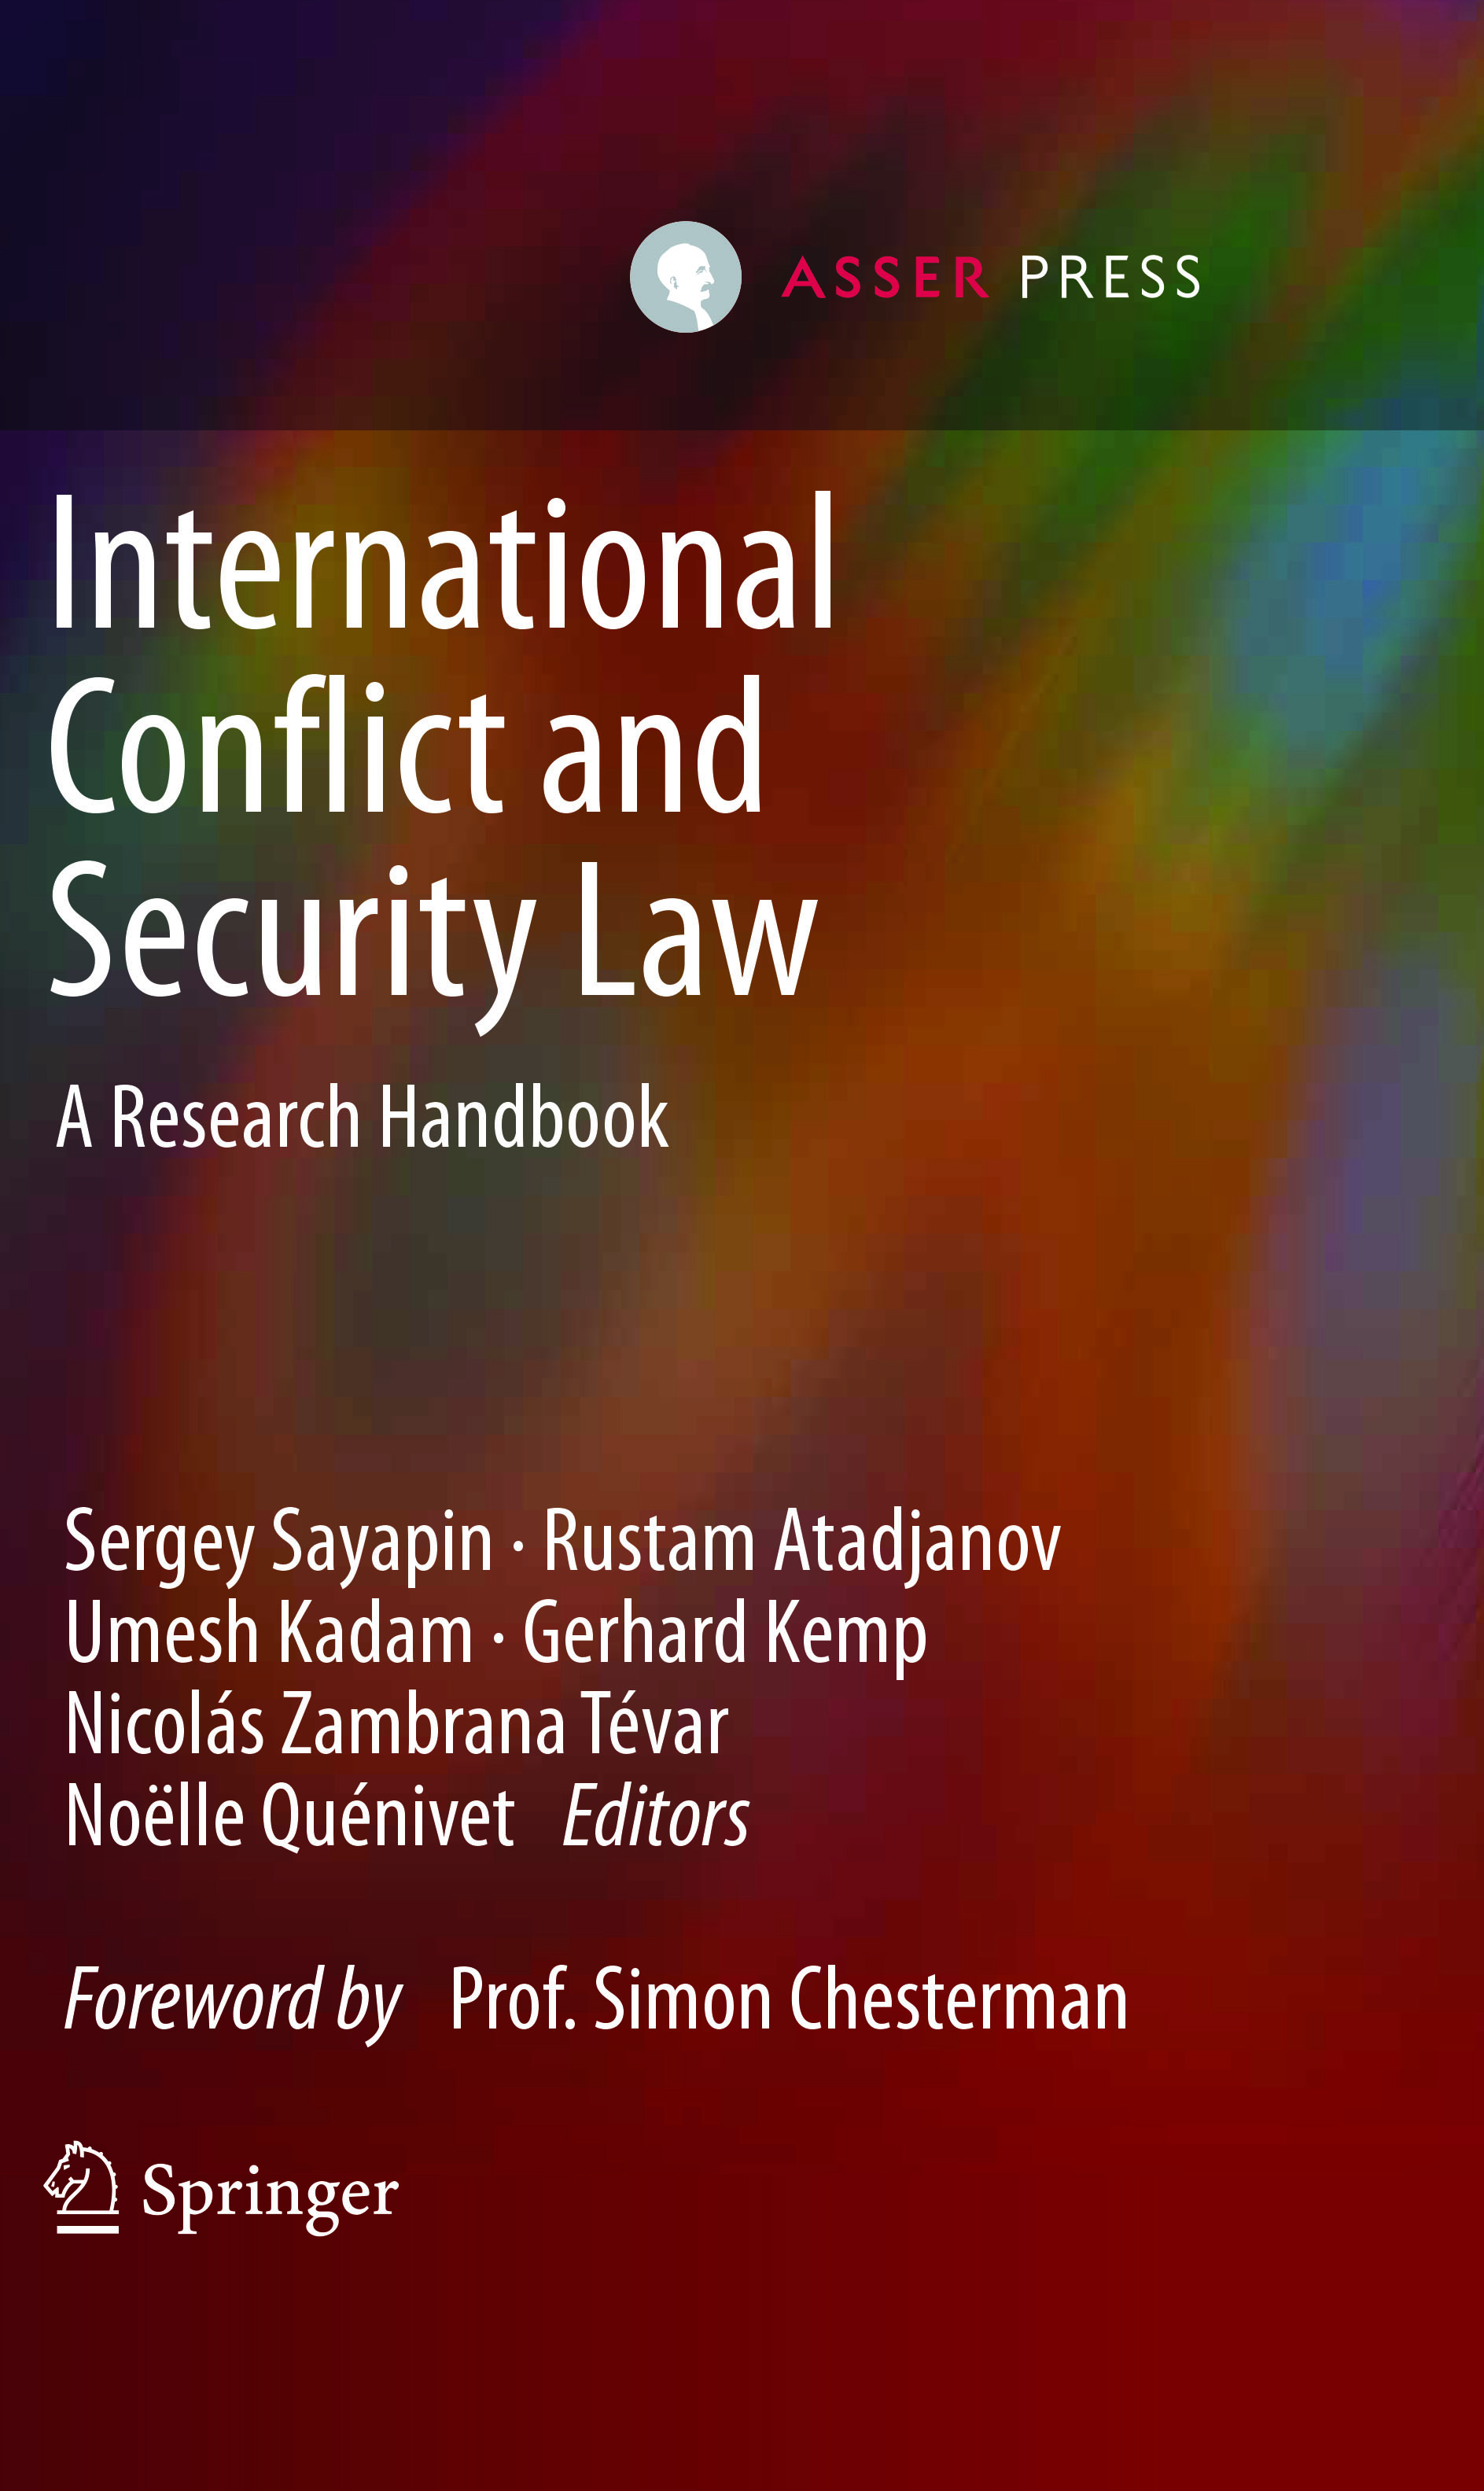 International Conflict and Security Law - A Research Handbook